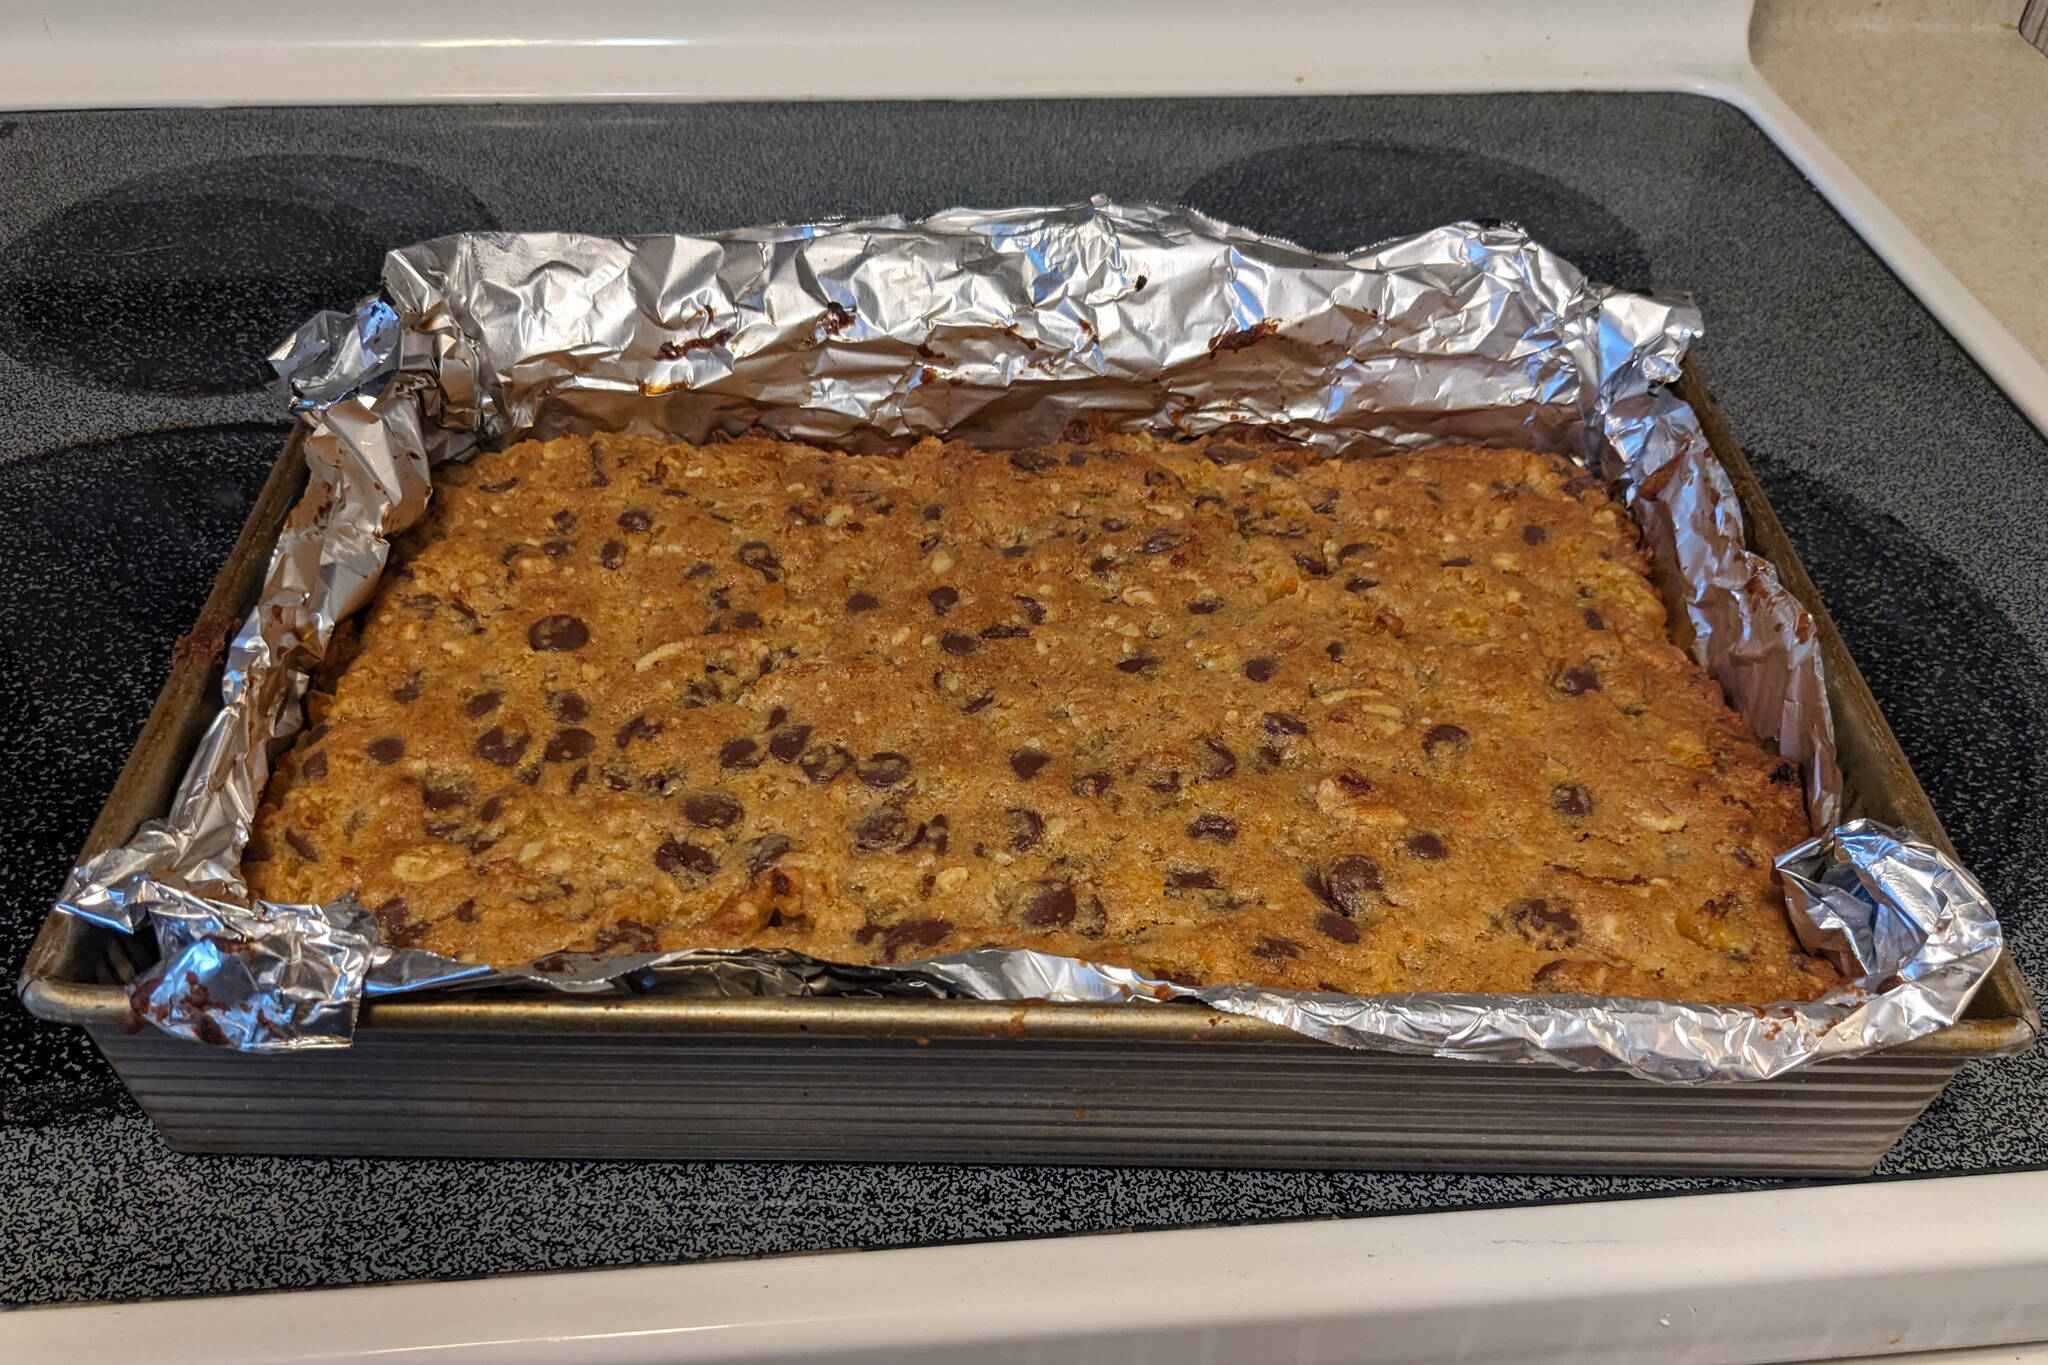 Finished chocolate apricot bars just out of the oven. (Photo by Patty Schied)